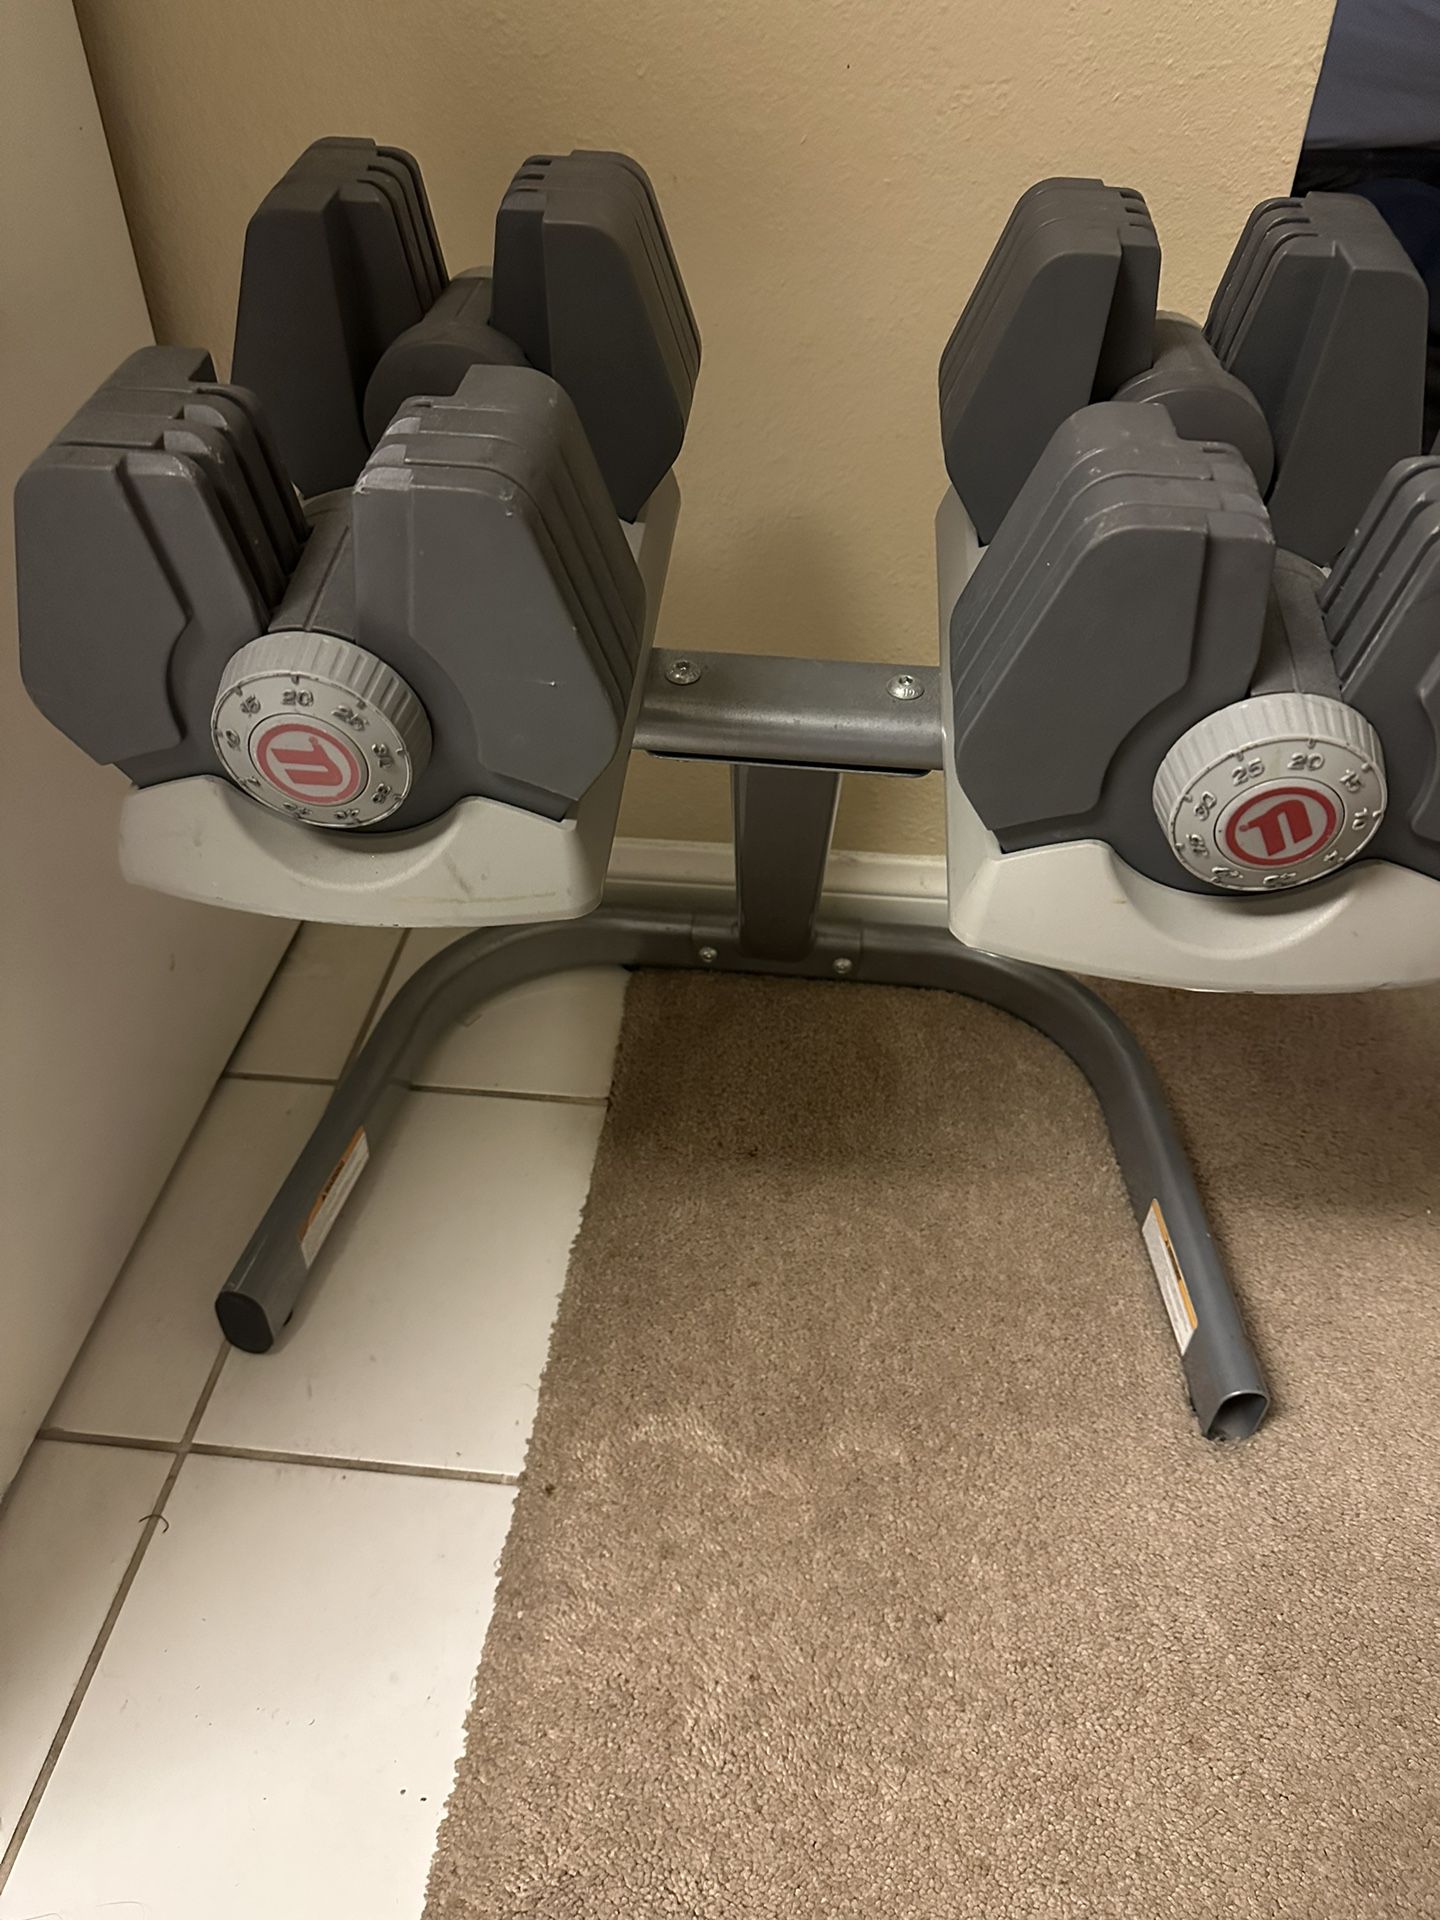 Adjustable Nautilus dumbbells with stand.